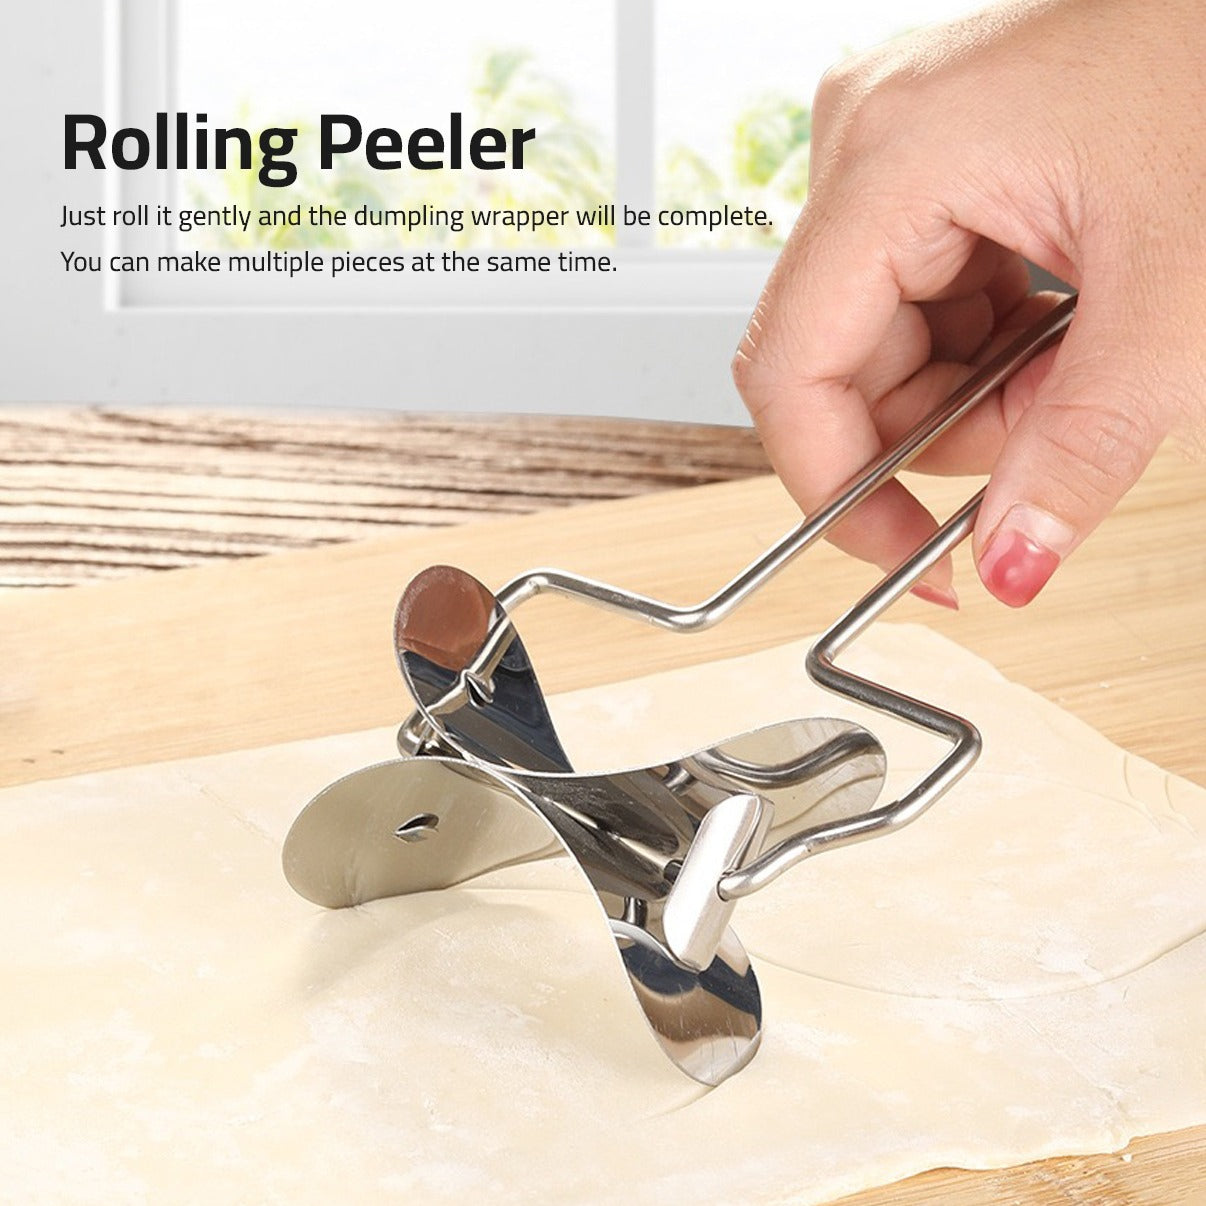 A Person is Cutting Dough Using Stainless Steel Dumpling Wrapper Maker.